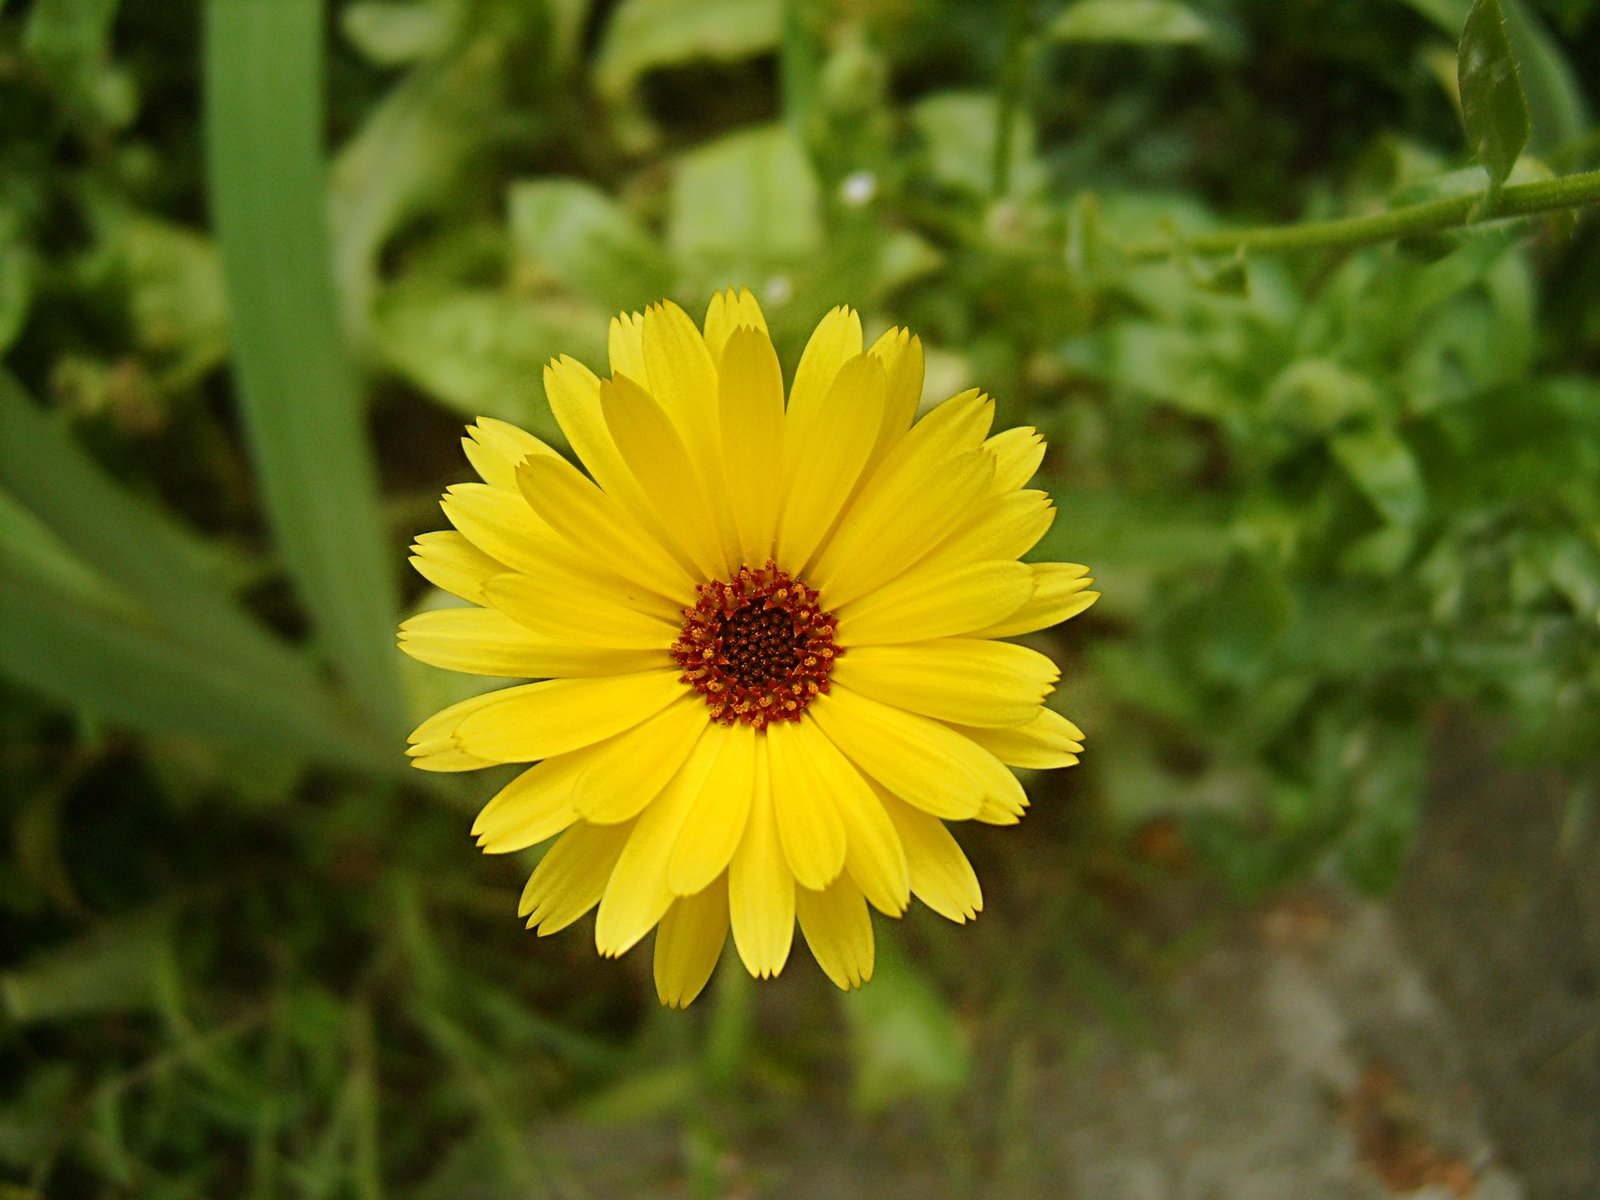 a yellow flower with red stimblings in the middle